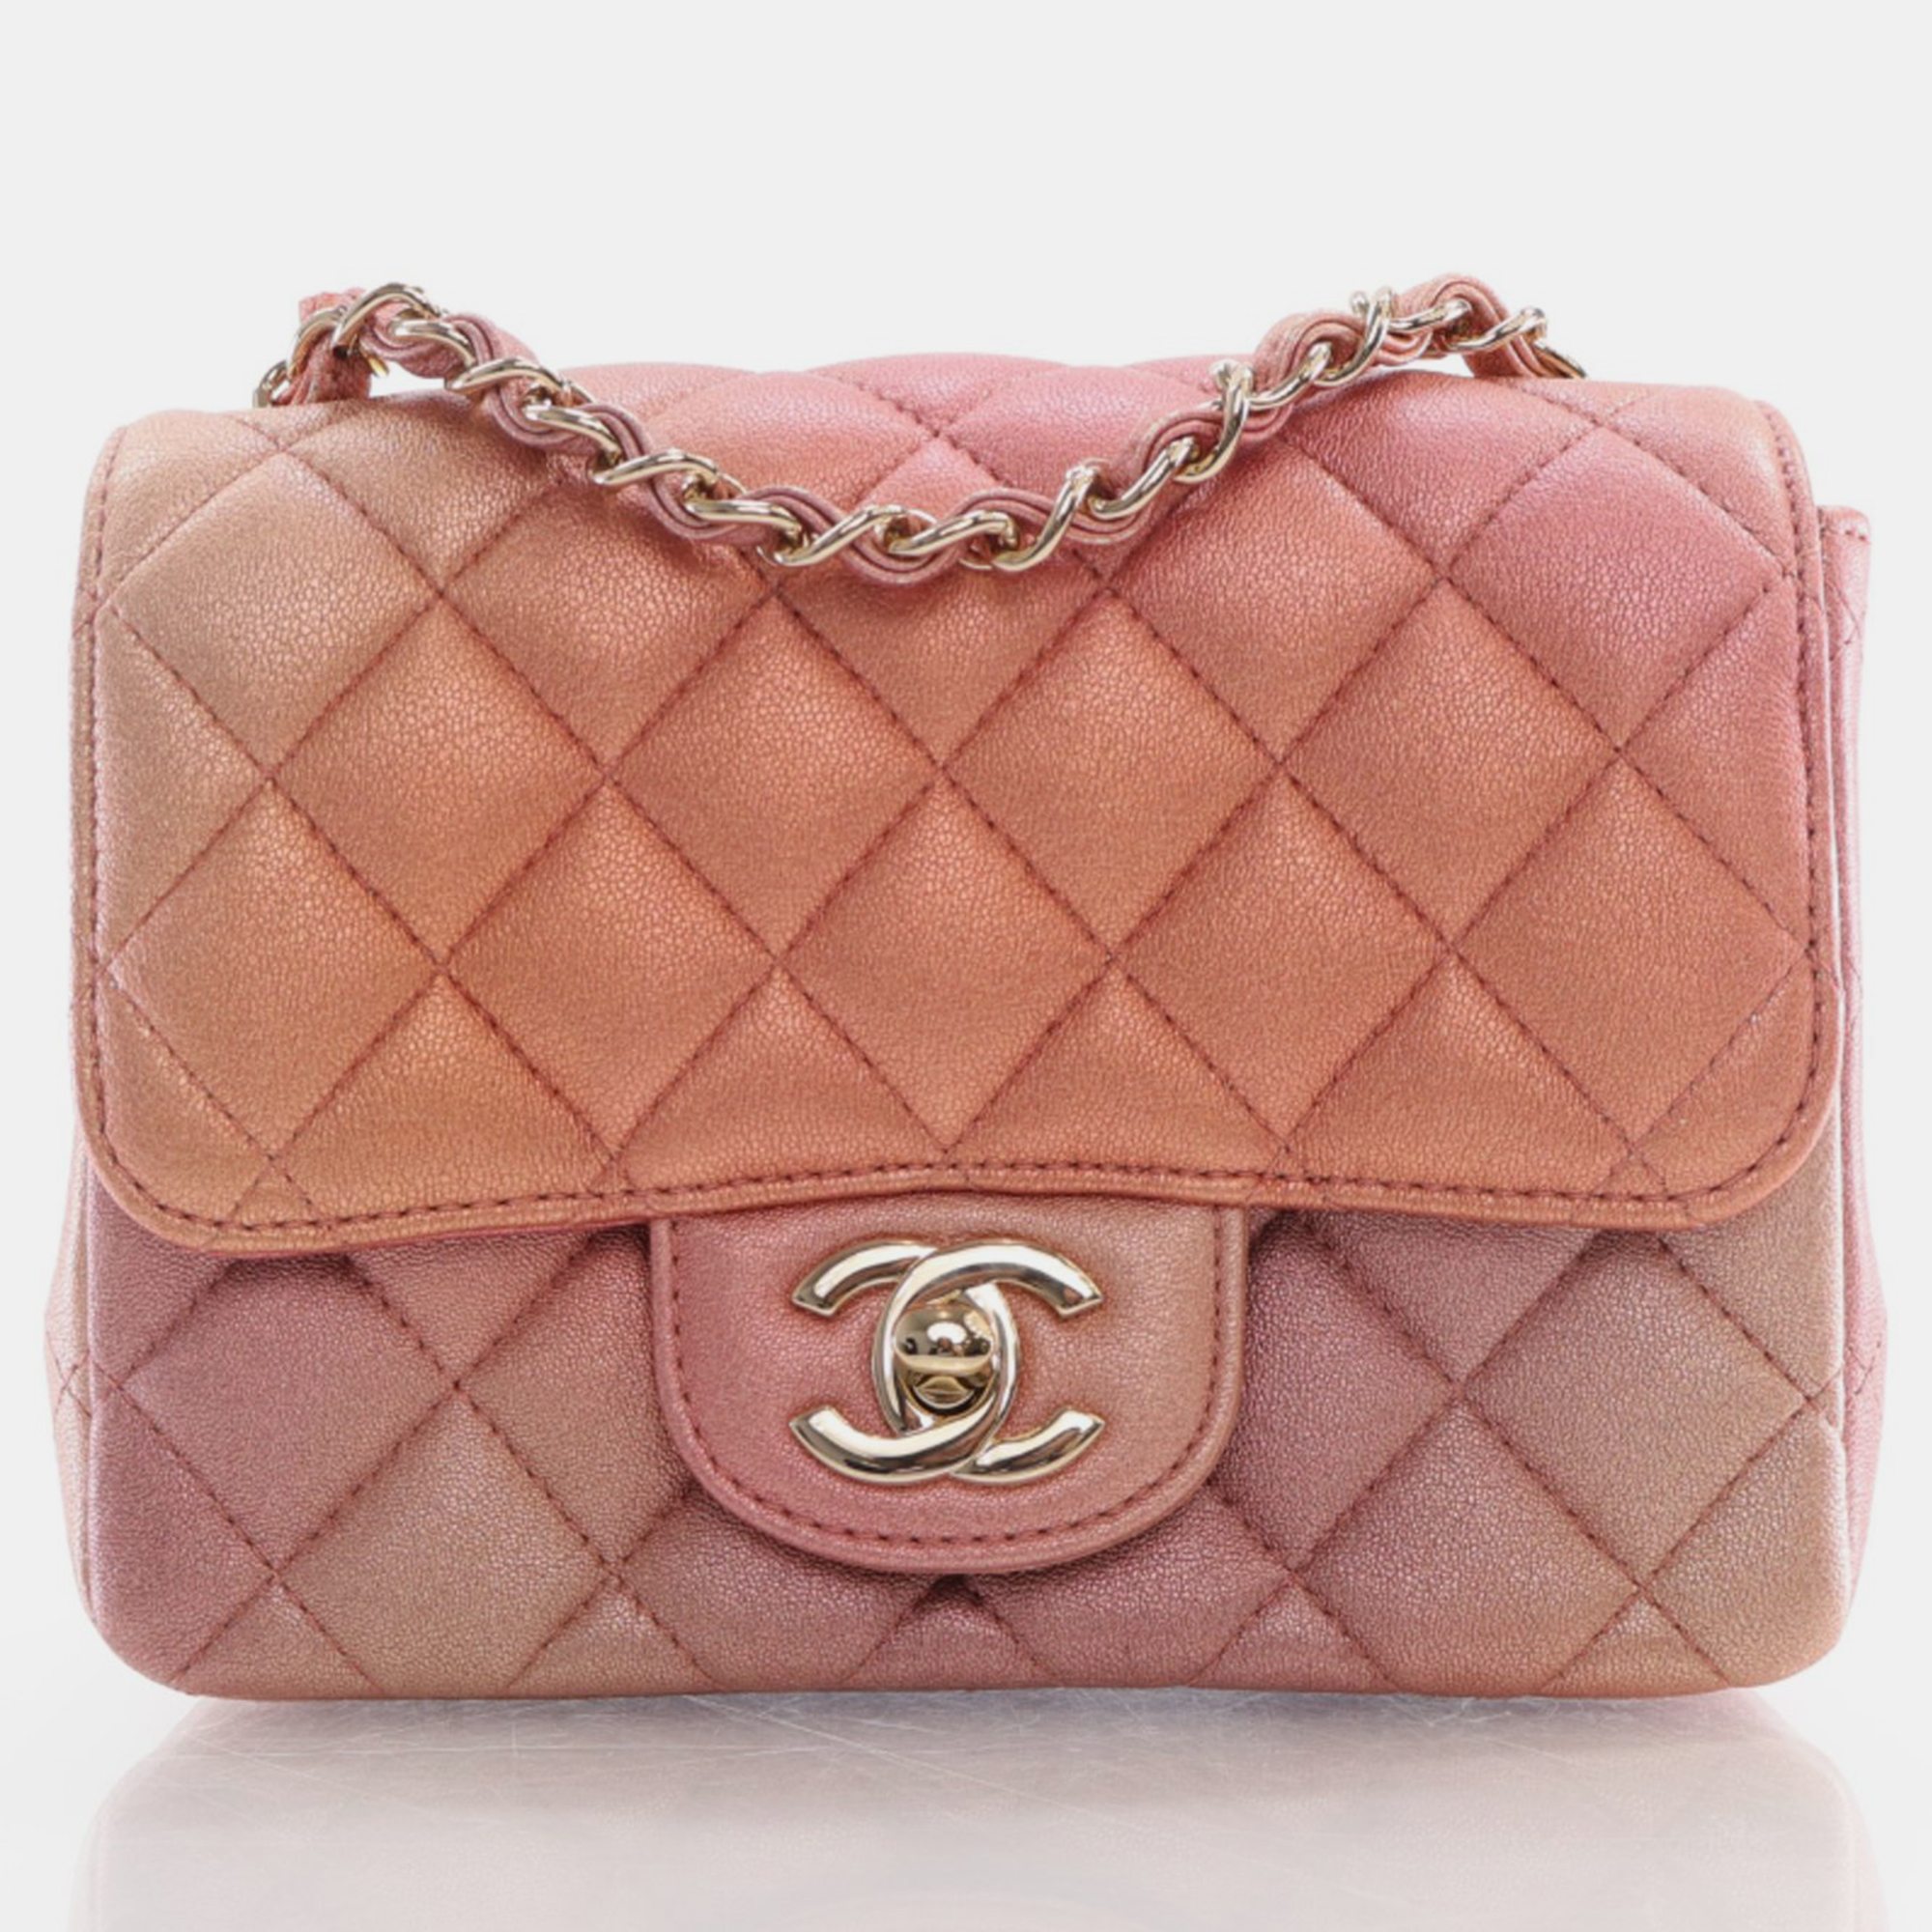 Chanel metallic rose gold quilted calfskin mini classic flap bag